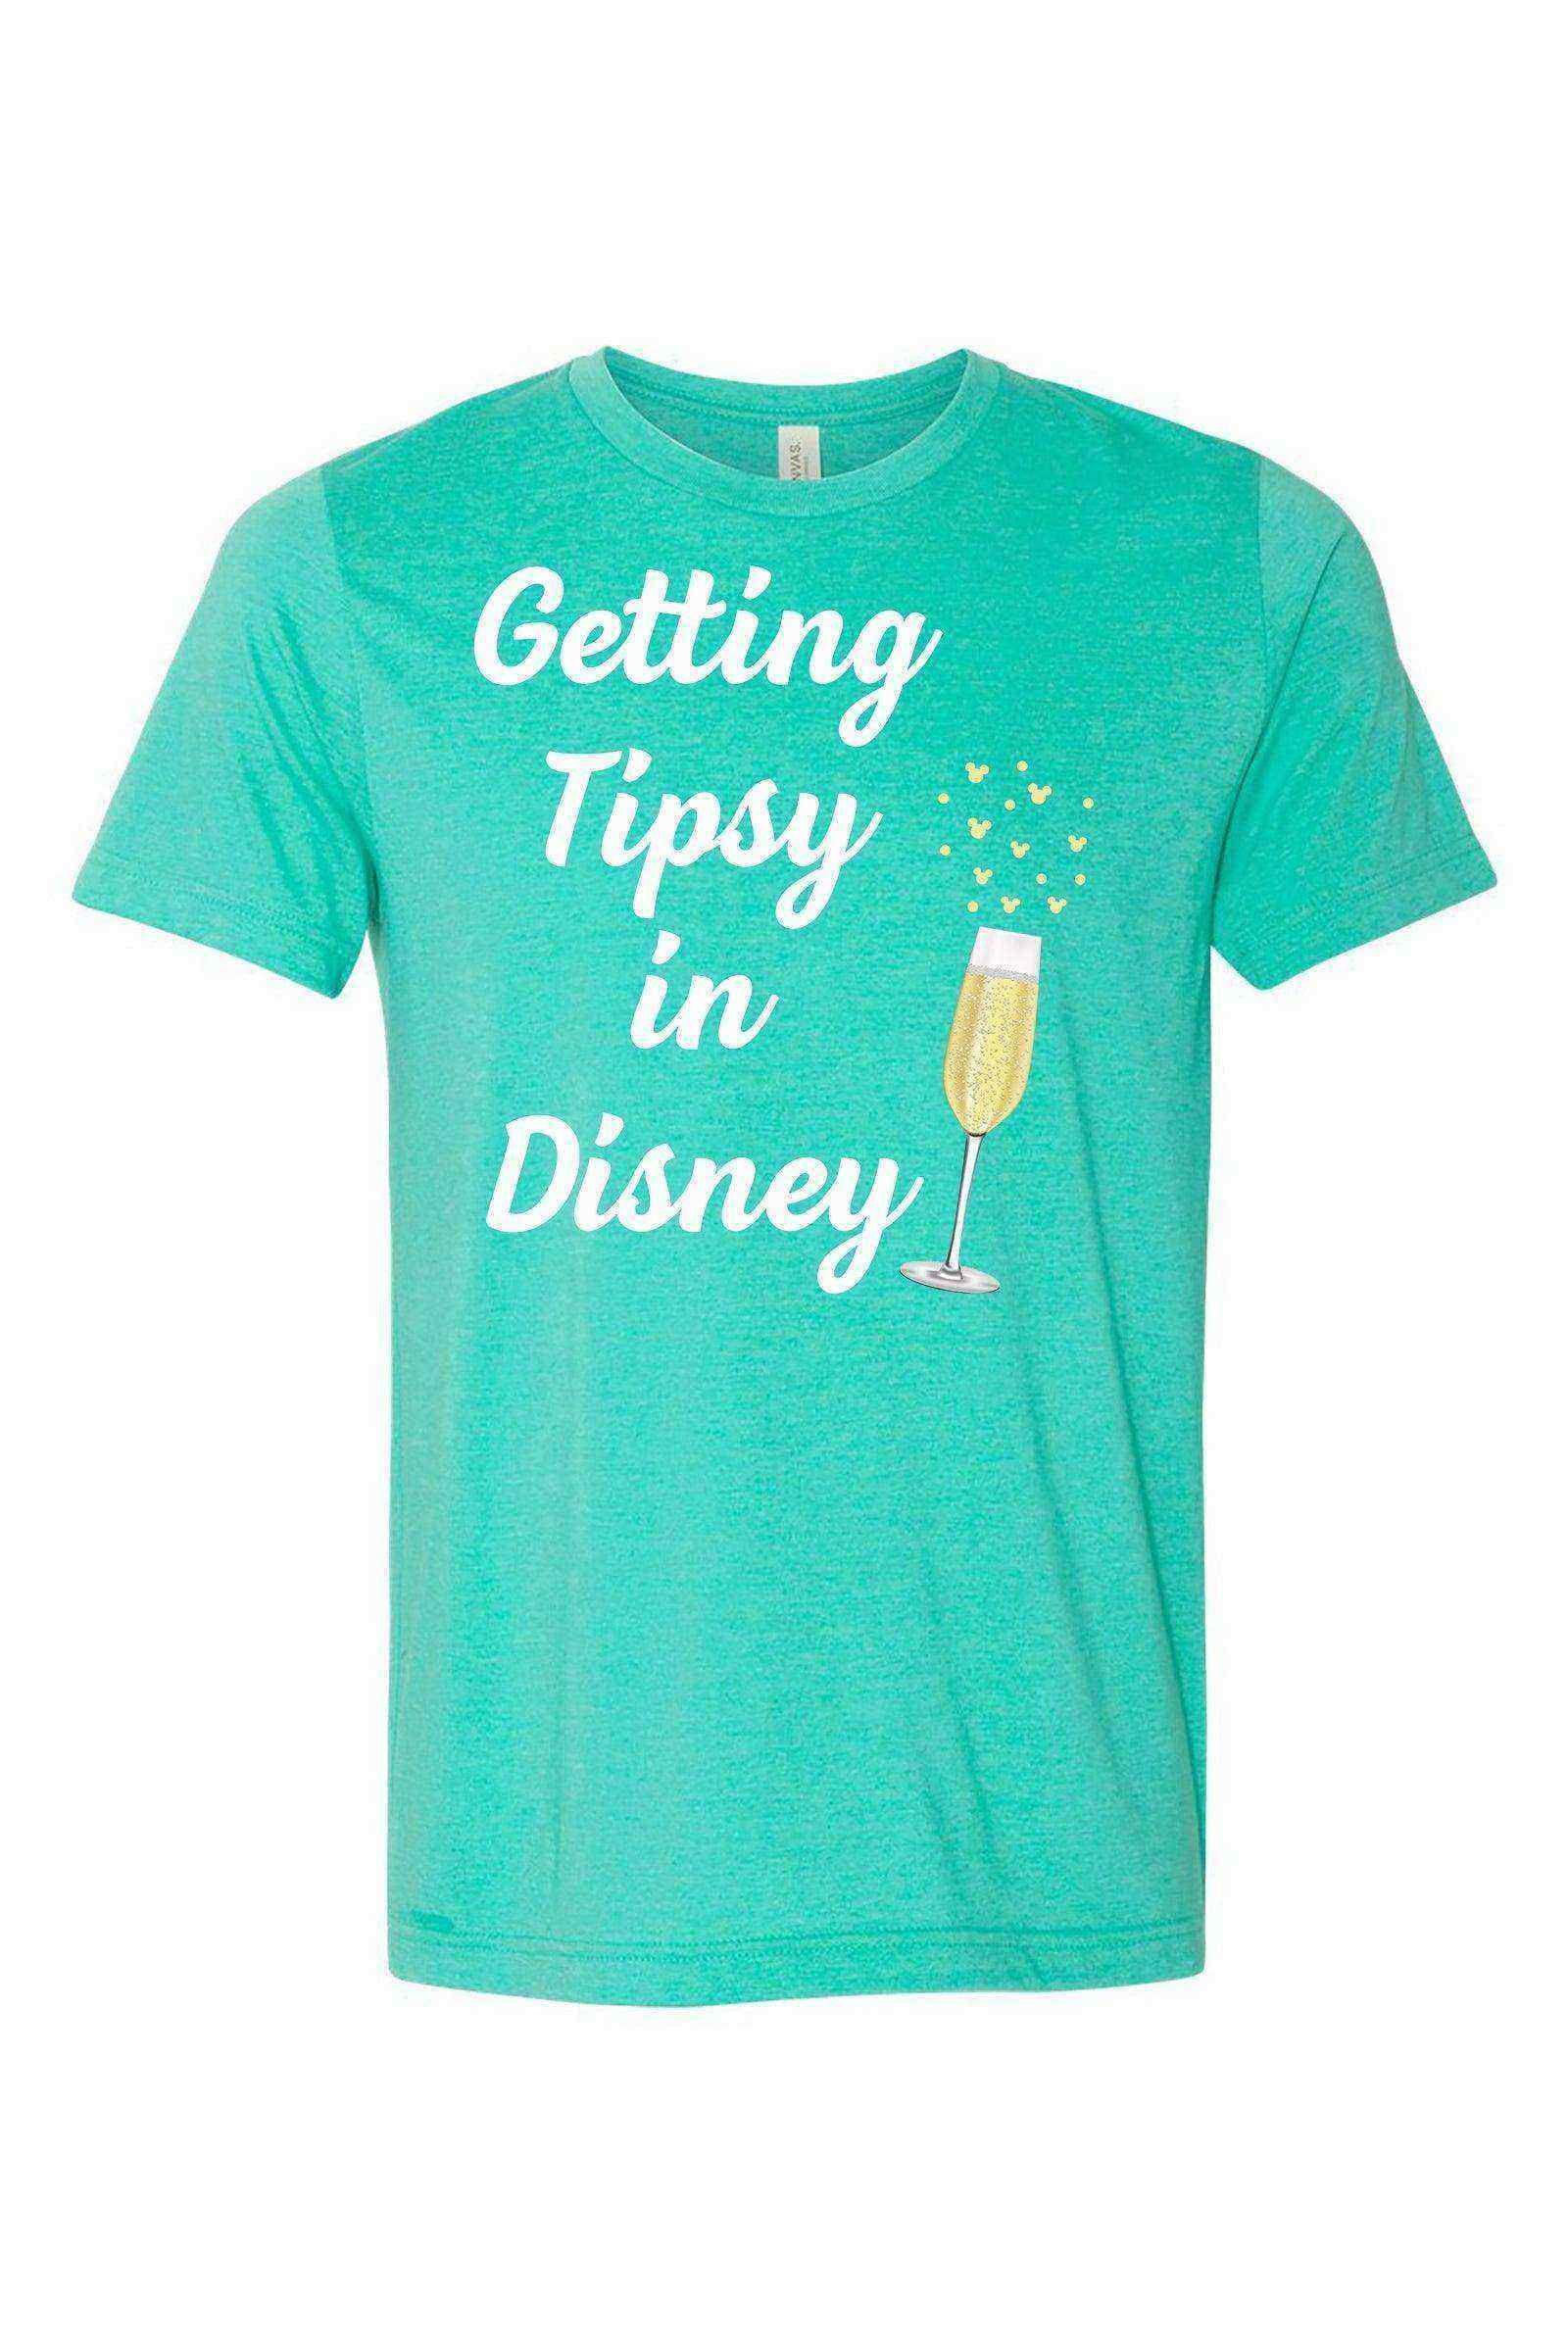 Womens | Getting Tipsy in Tee - Dylan's Tees